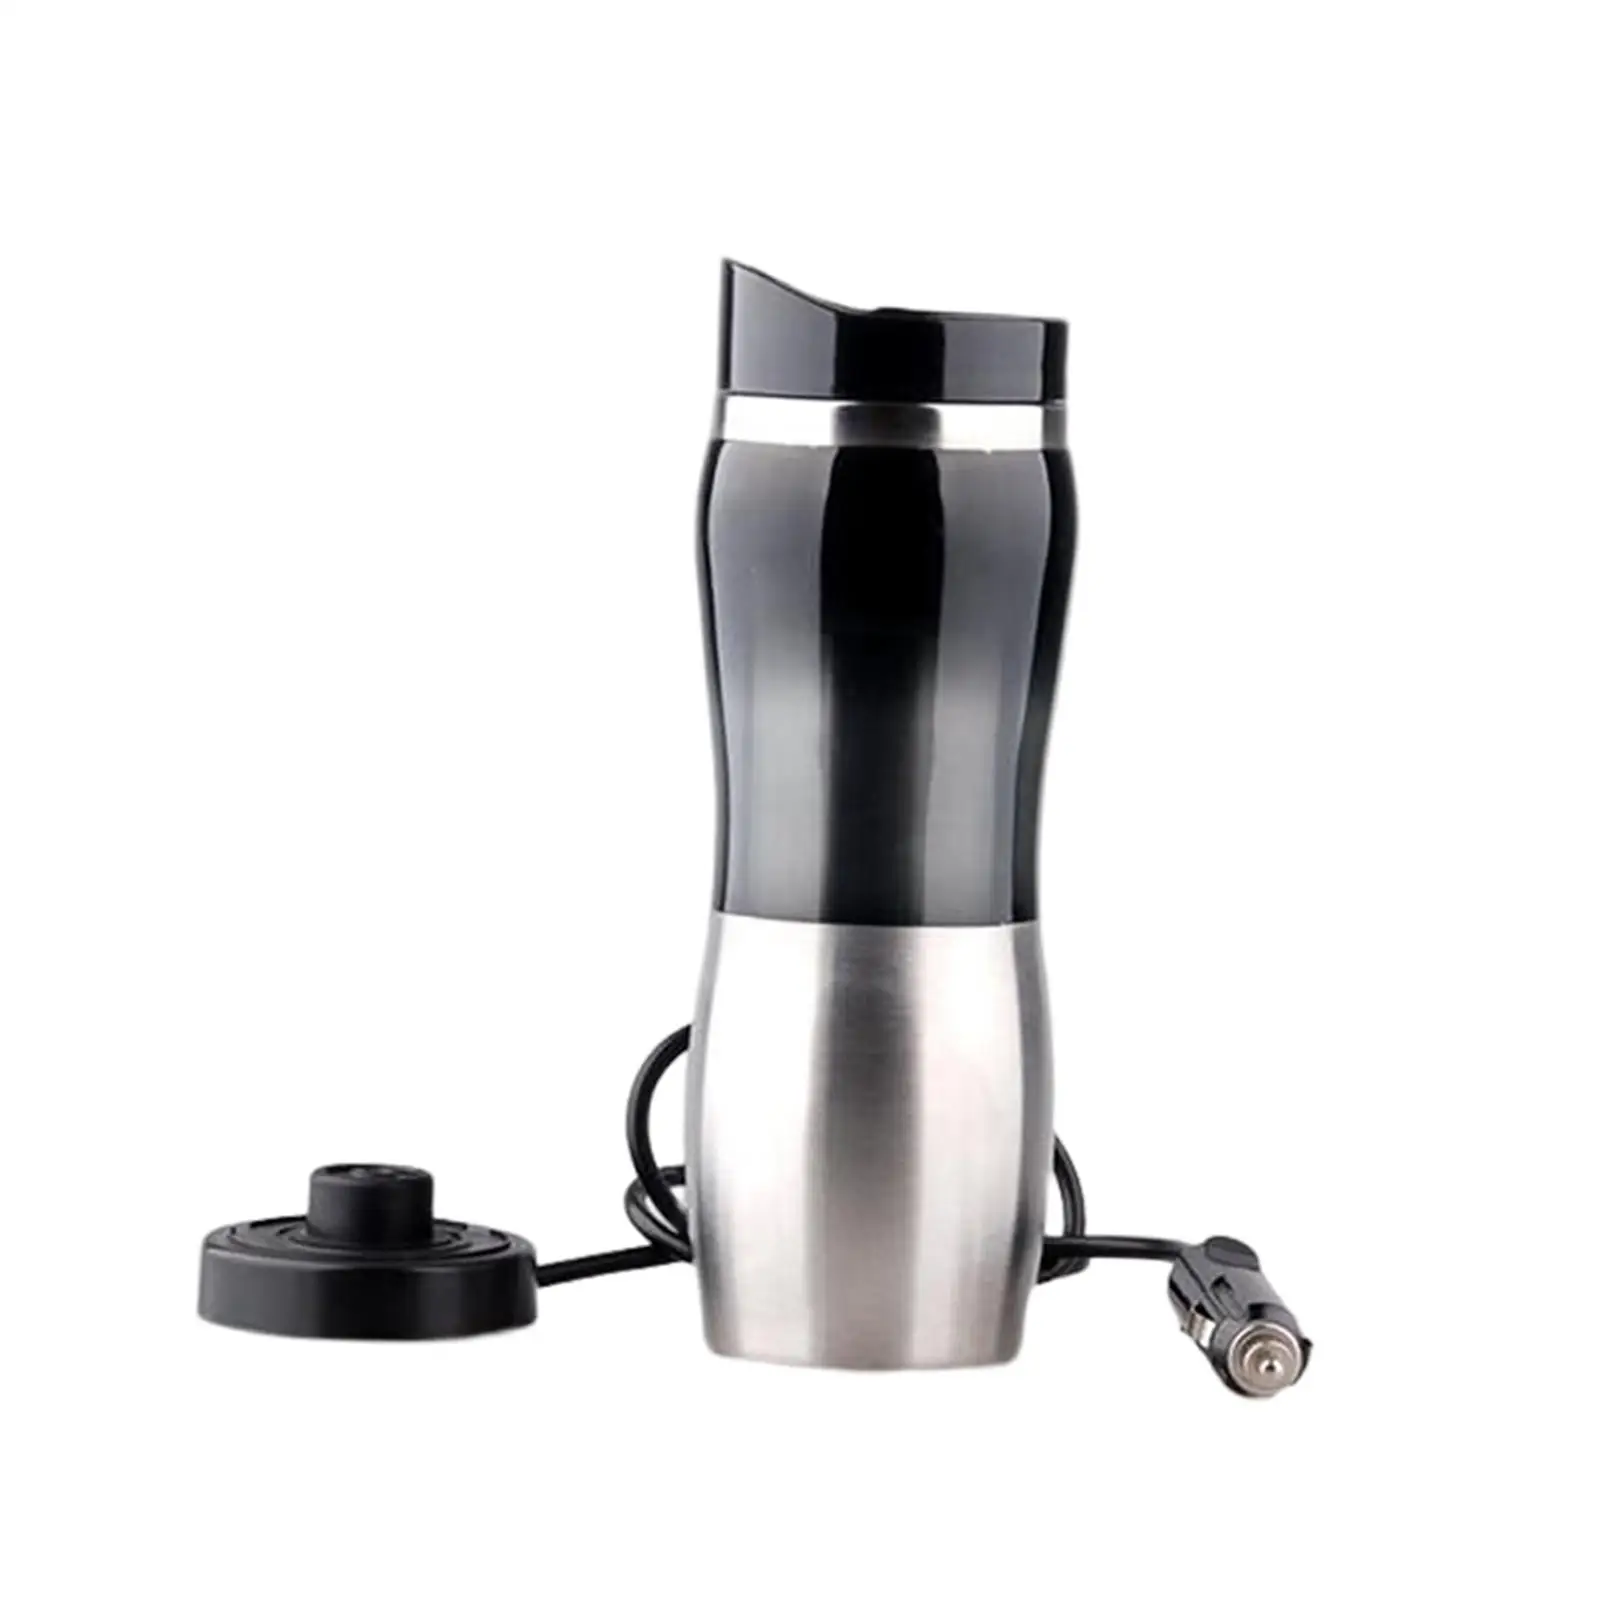  Kettle/ 12V 400ml/ Portable /Stainless Steel/ Electric Car Water Heater/ Auto Heating Bottle for Hot Water Coffee Making Milk